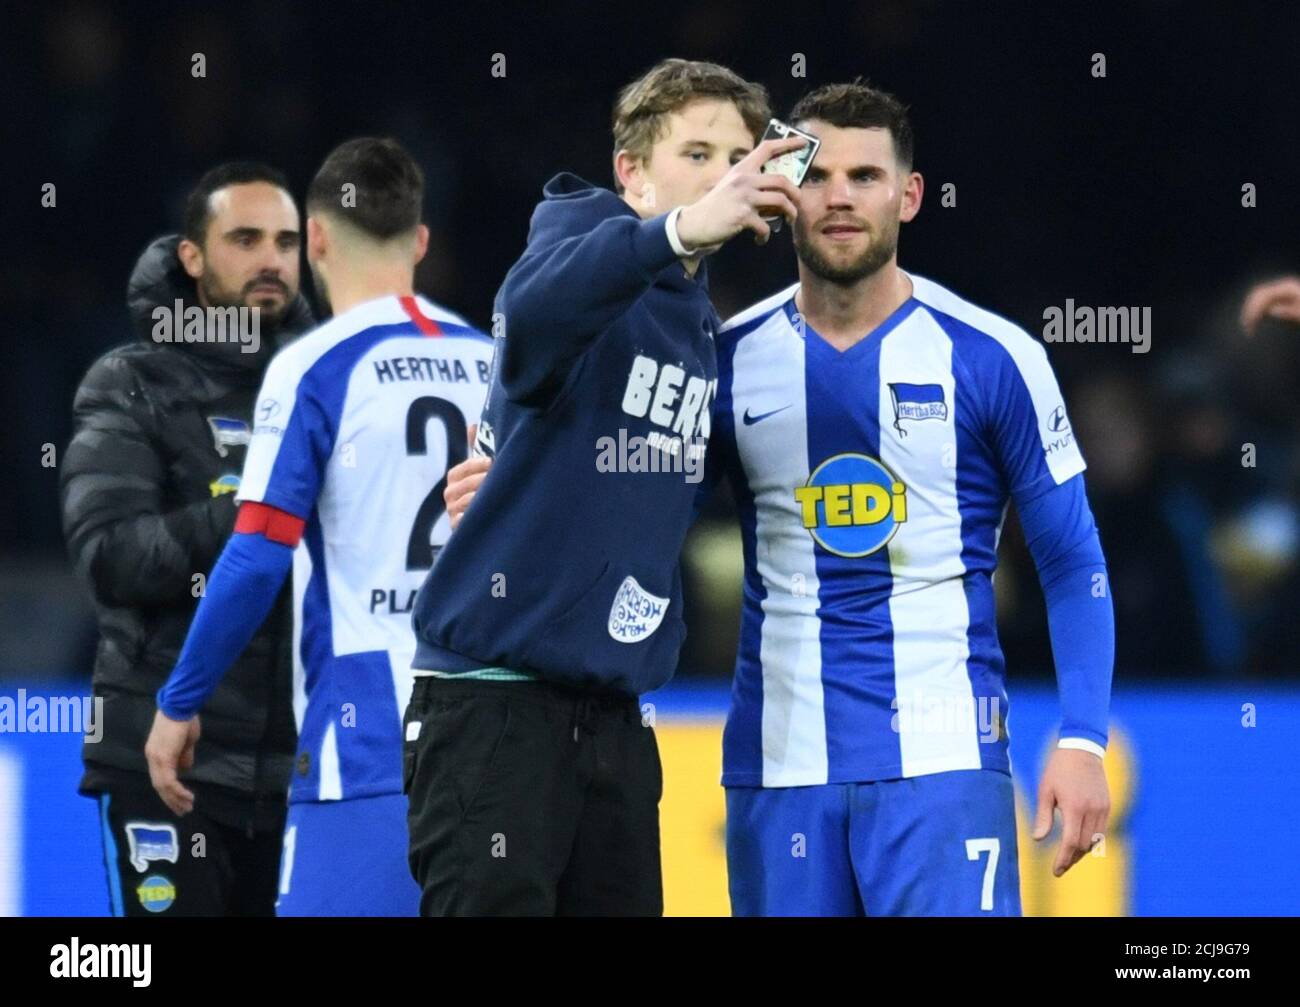 Soccer Football - Bundesliga - Hertha BSC v Borussia Moenchengladbach -  Olympiastadion, Berlin, Germany - December 21, 2019 Hertha BSC's Eduard  Lowen poses for a selfie with a fan on the pitch